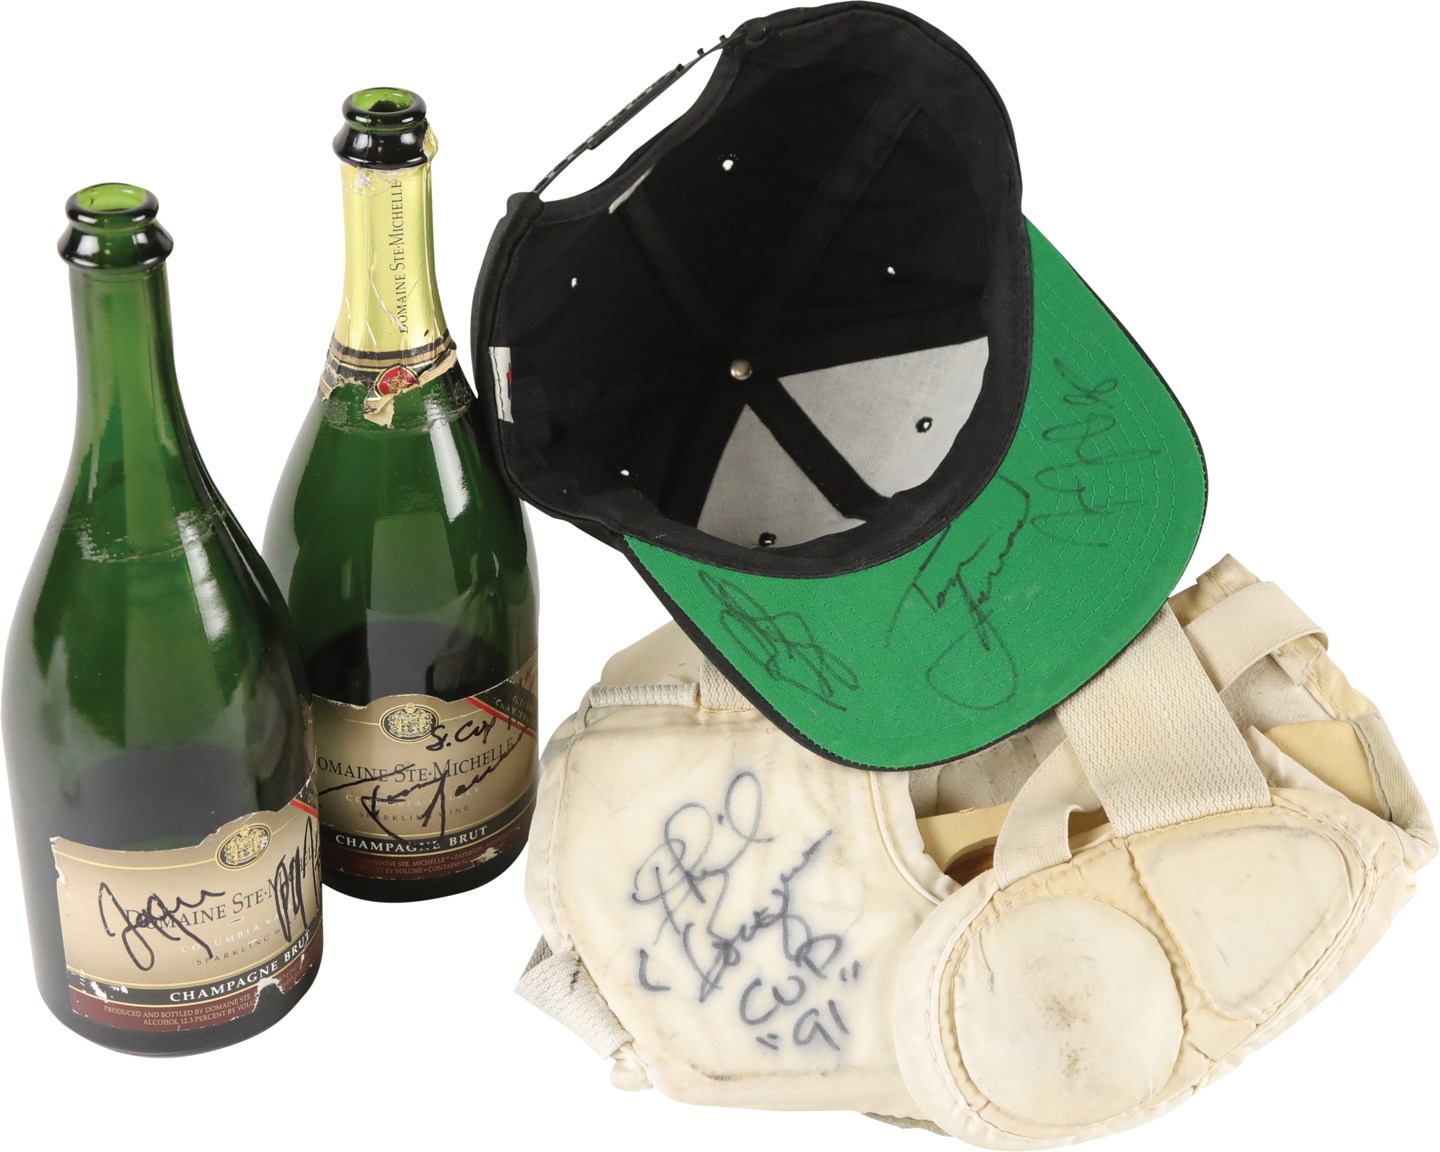 Hockey - 1991 Pittsburgh Penguins Stanley Cup Championship Champagne Bottle, Hat, and More